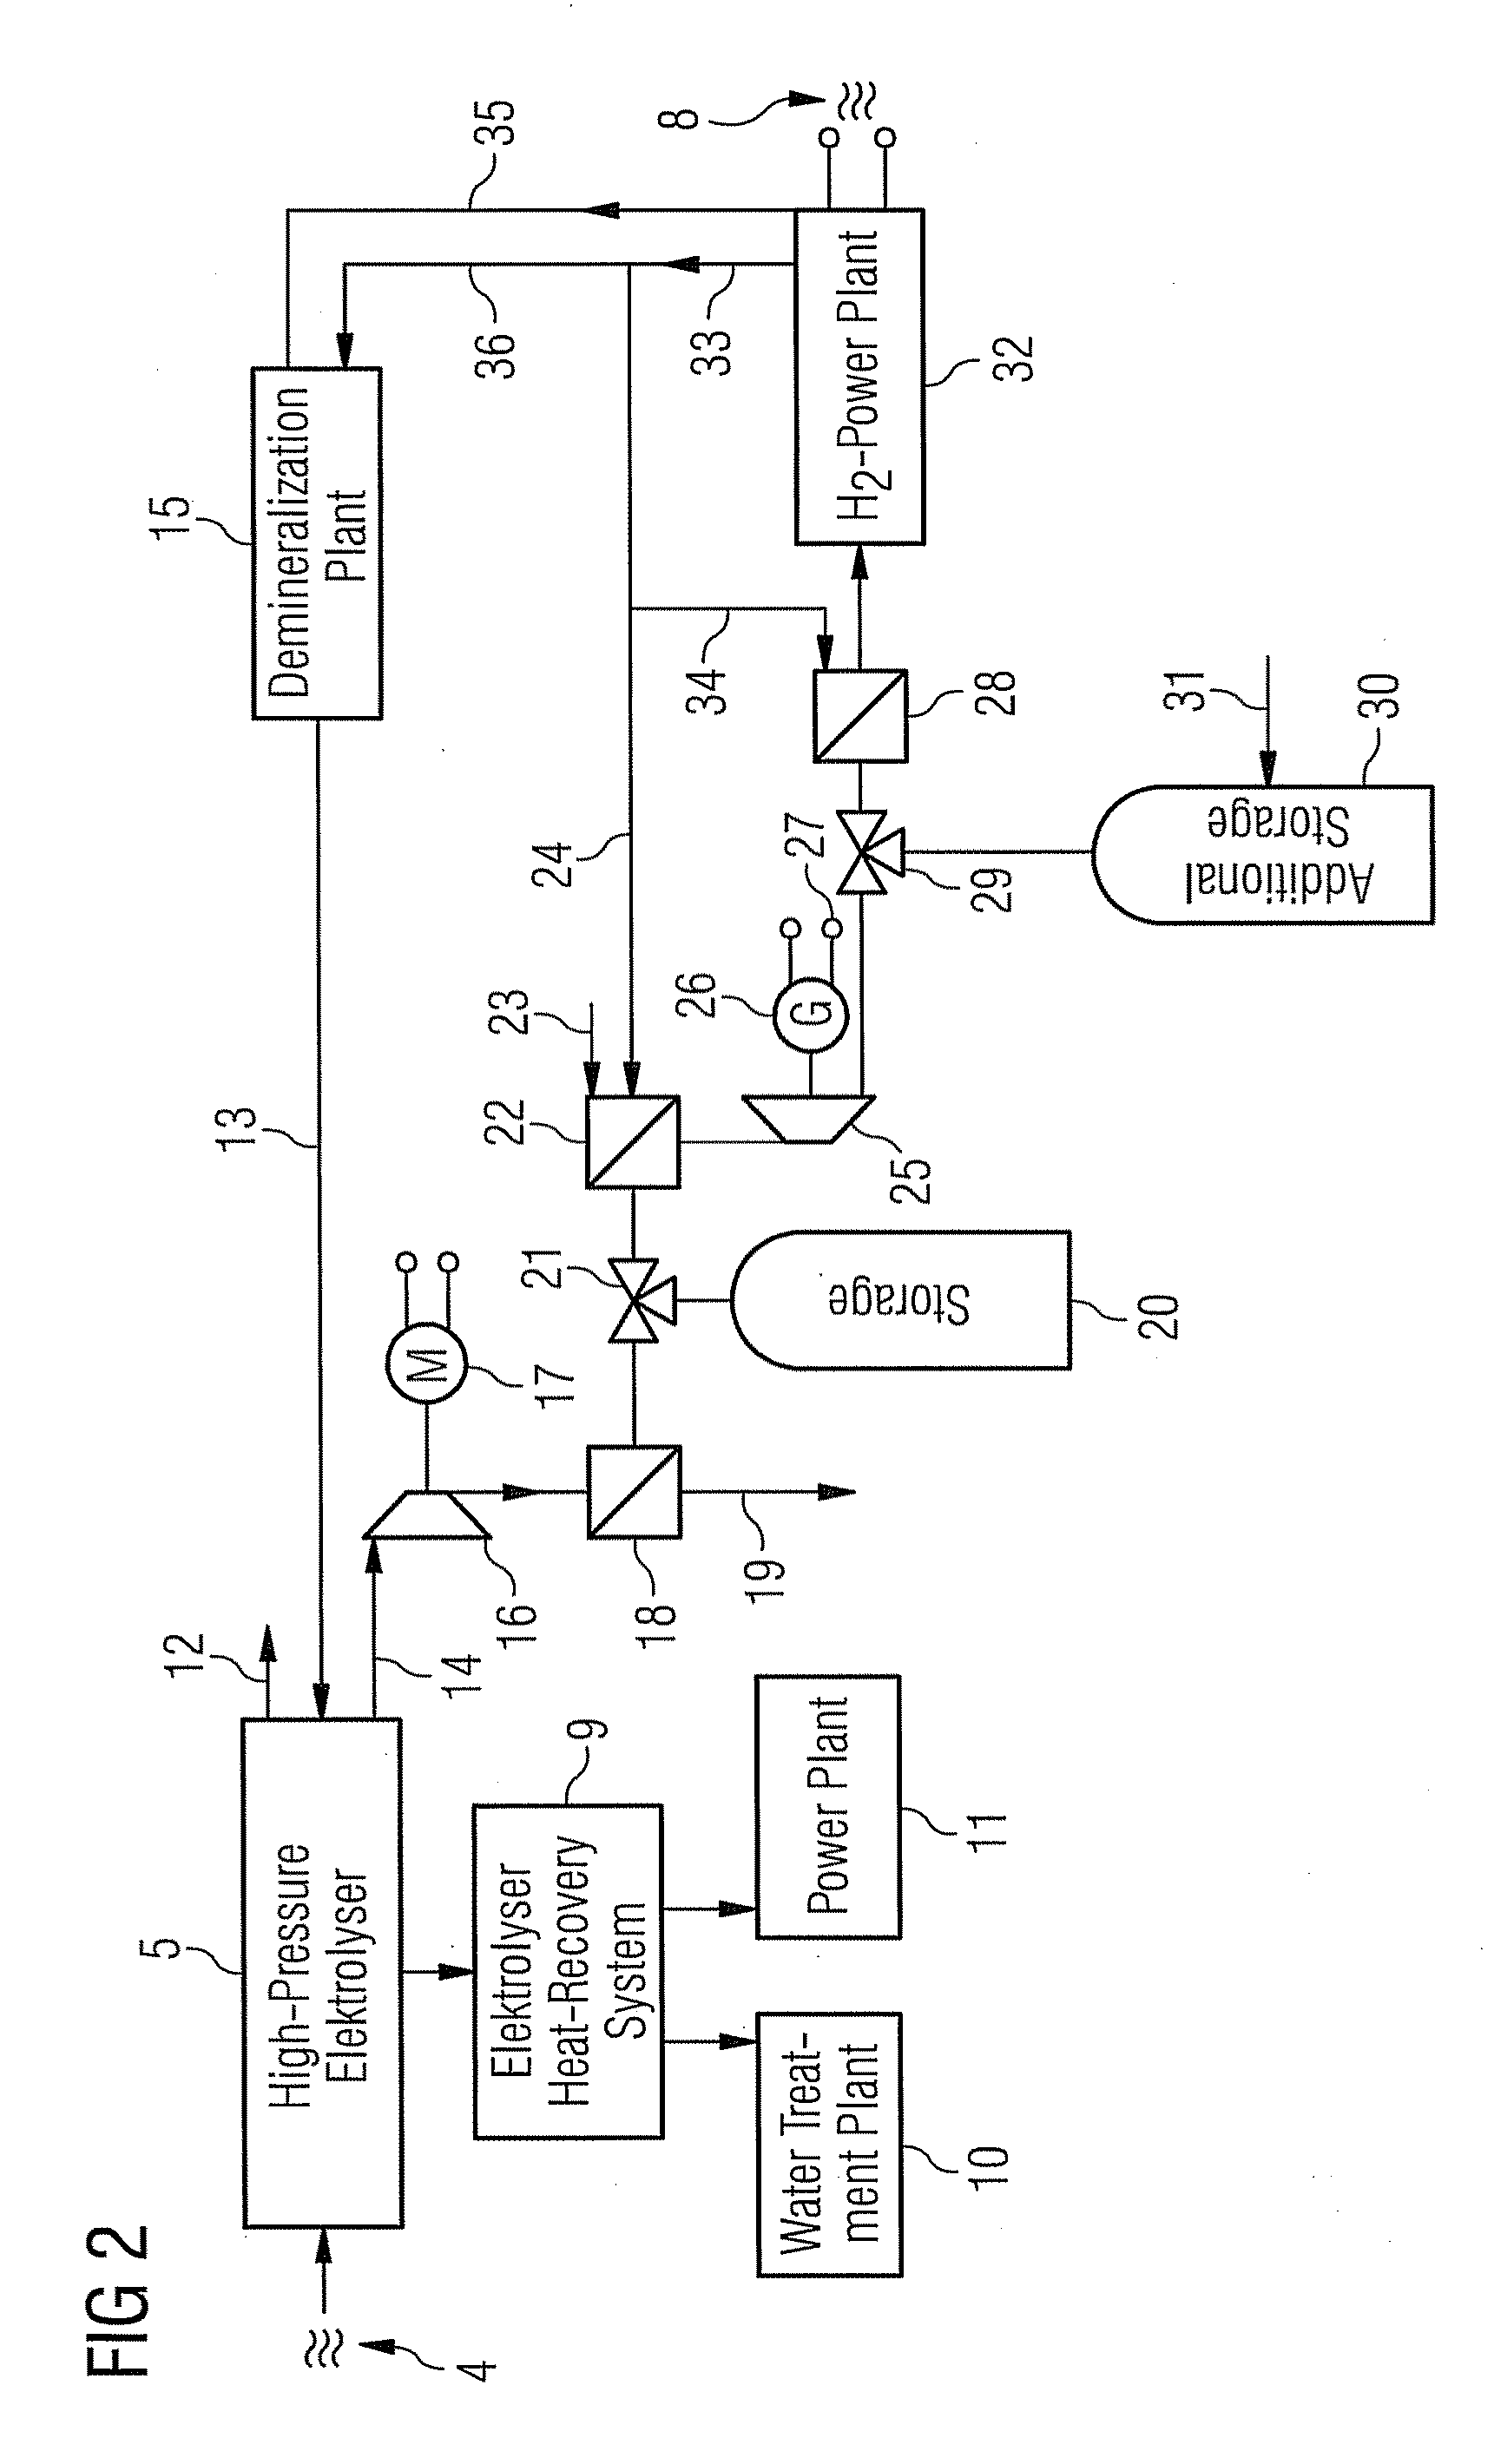 Energy storage system and method for storing and supplying energy